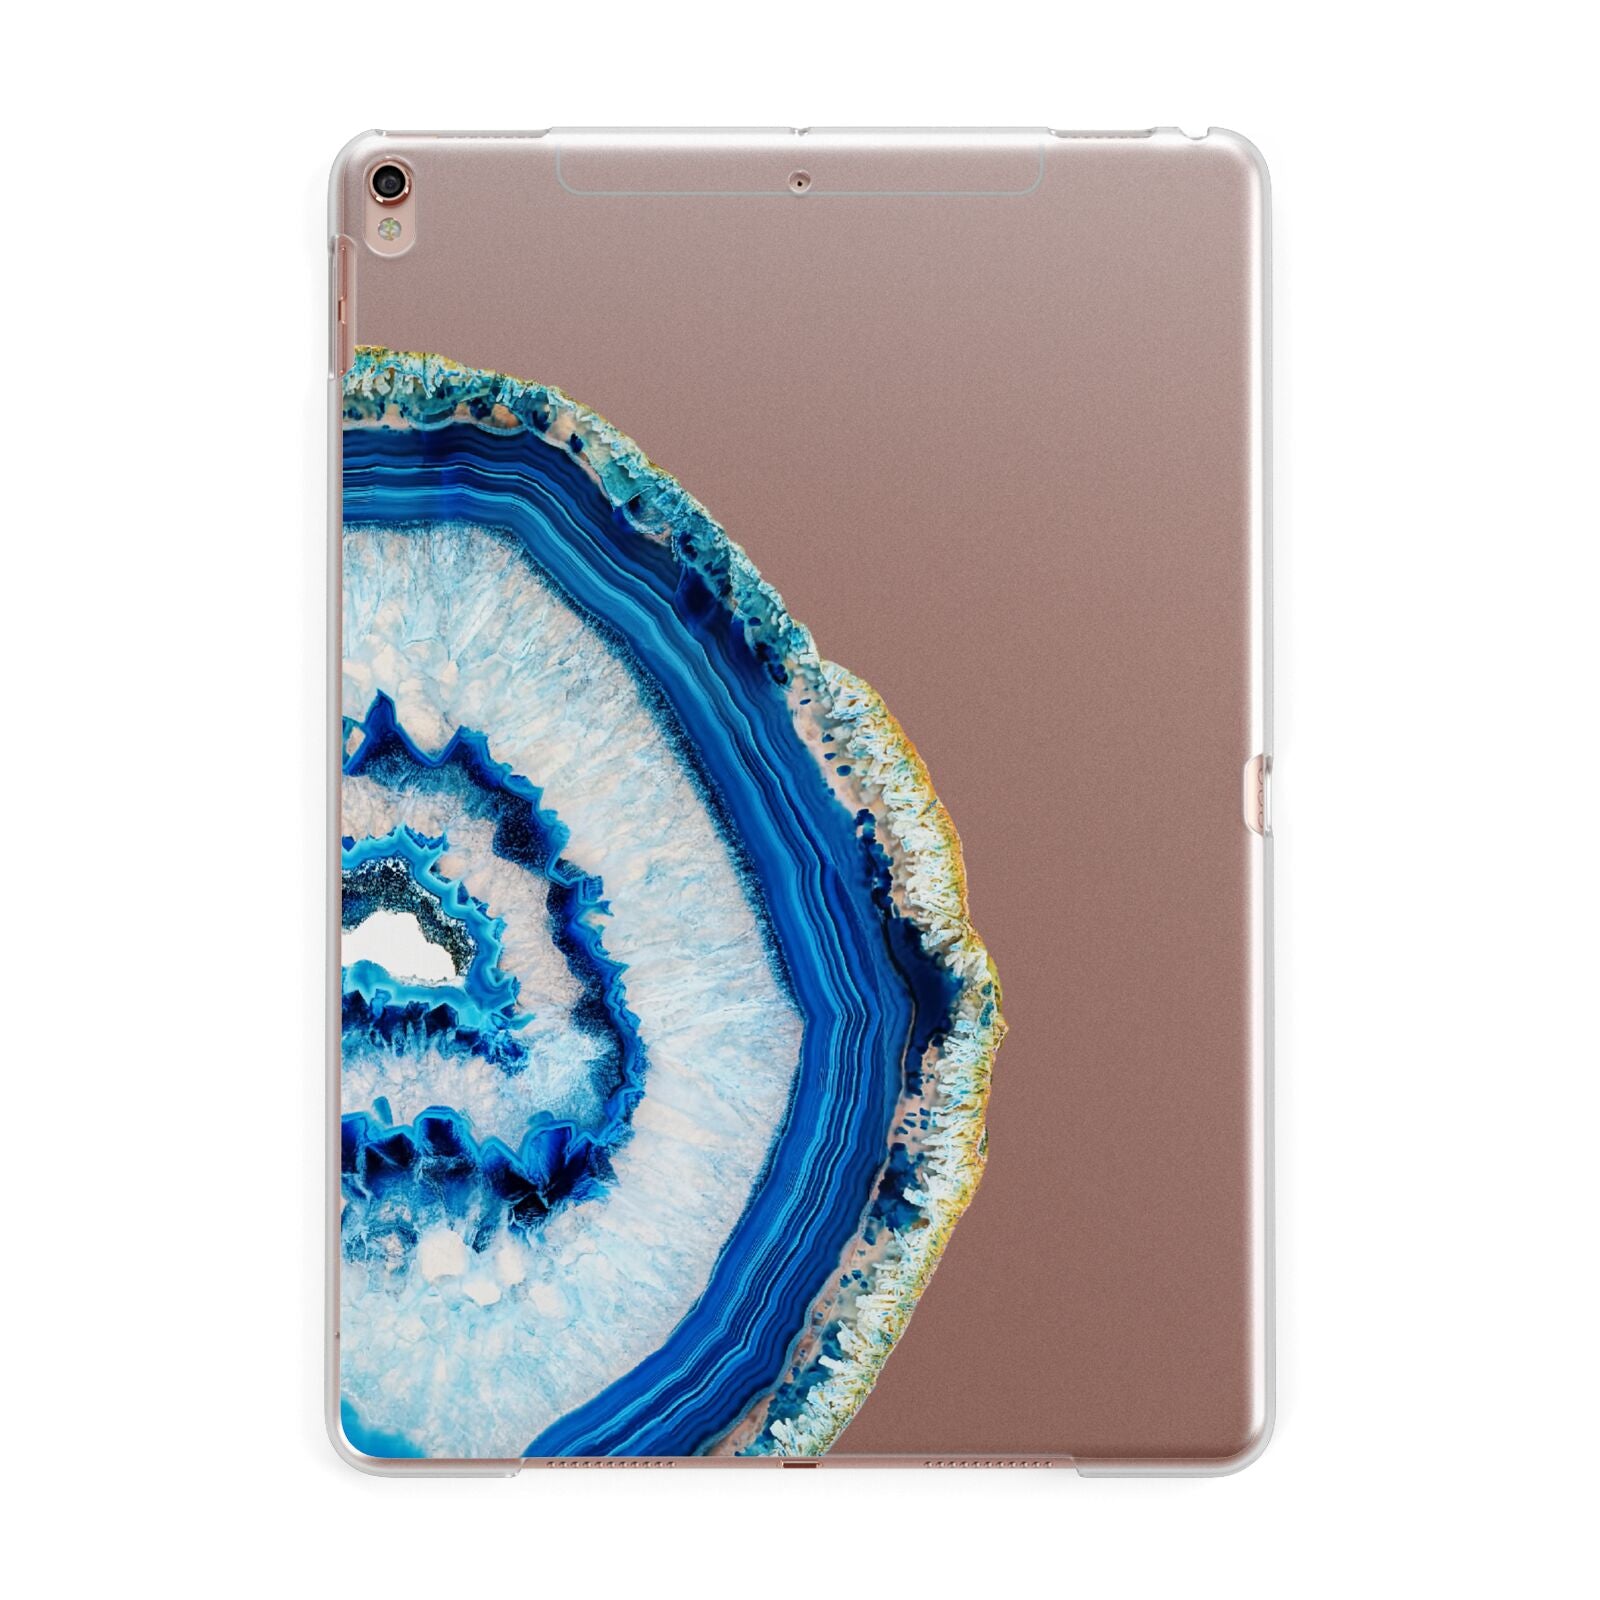 Agate Dark Blue and Turquoise Apple iPad Rose Gold Case